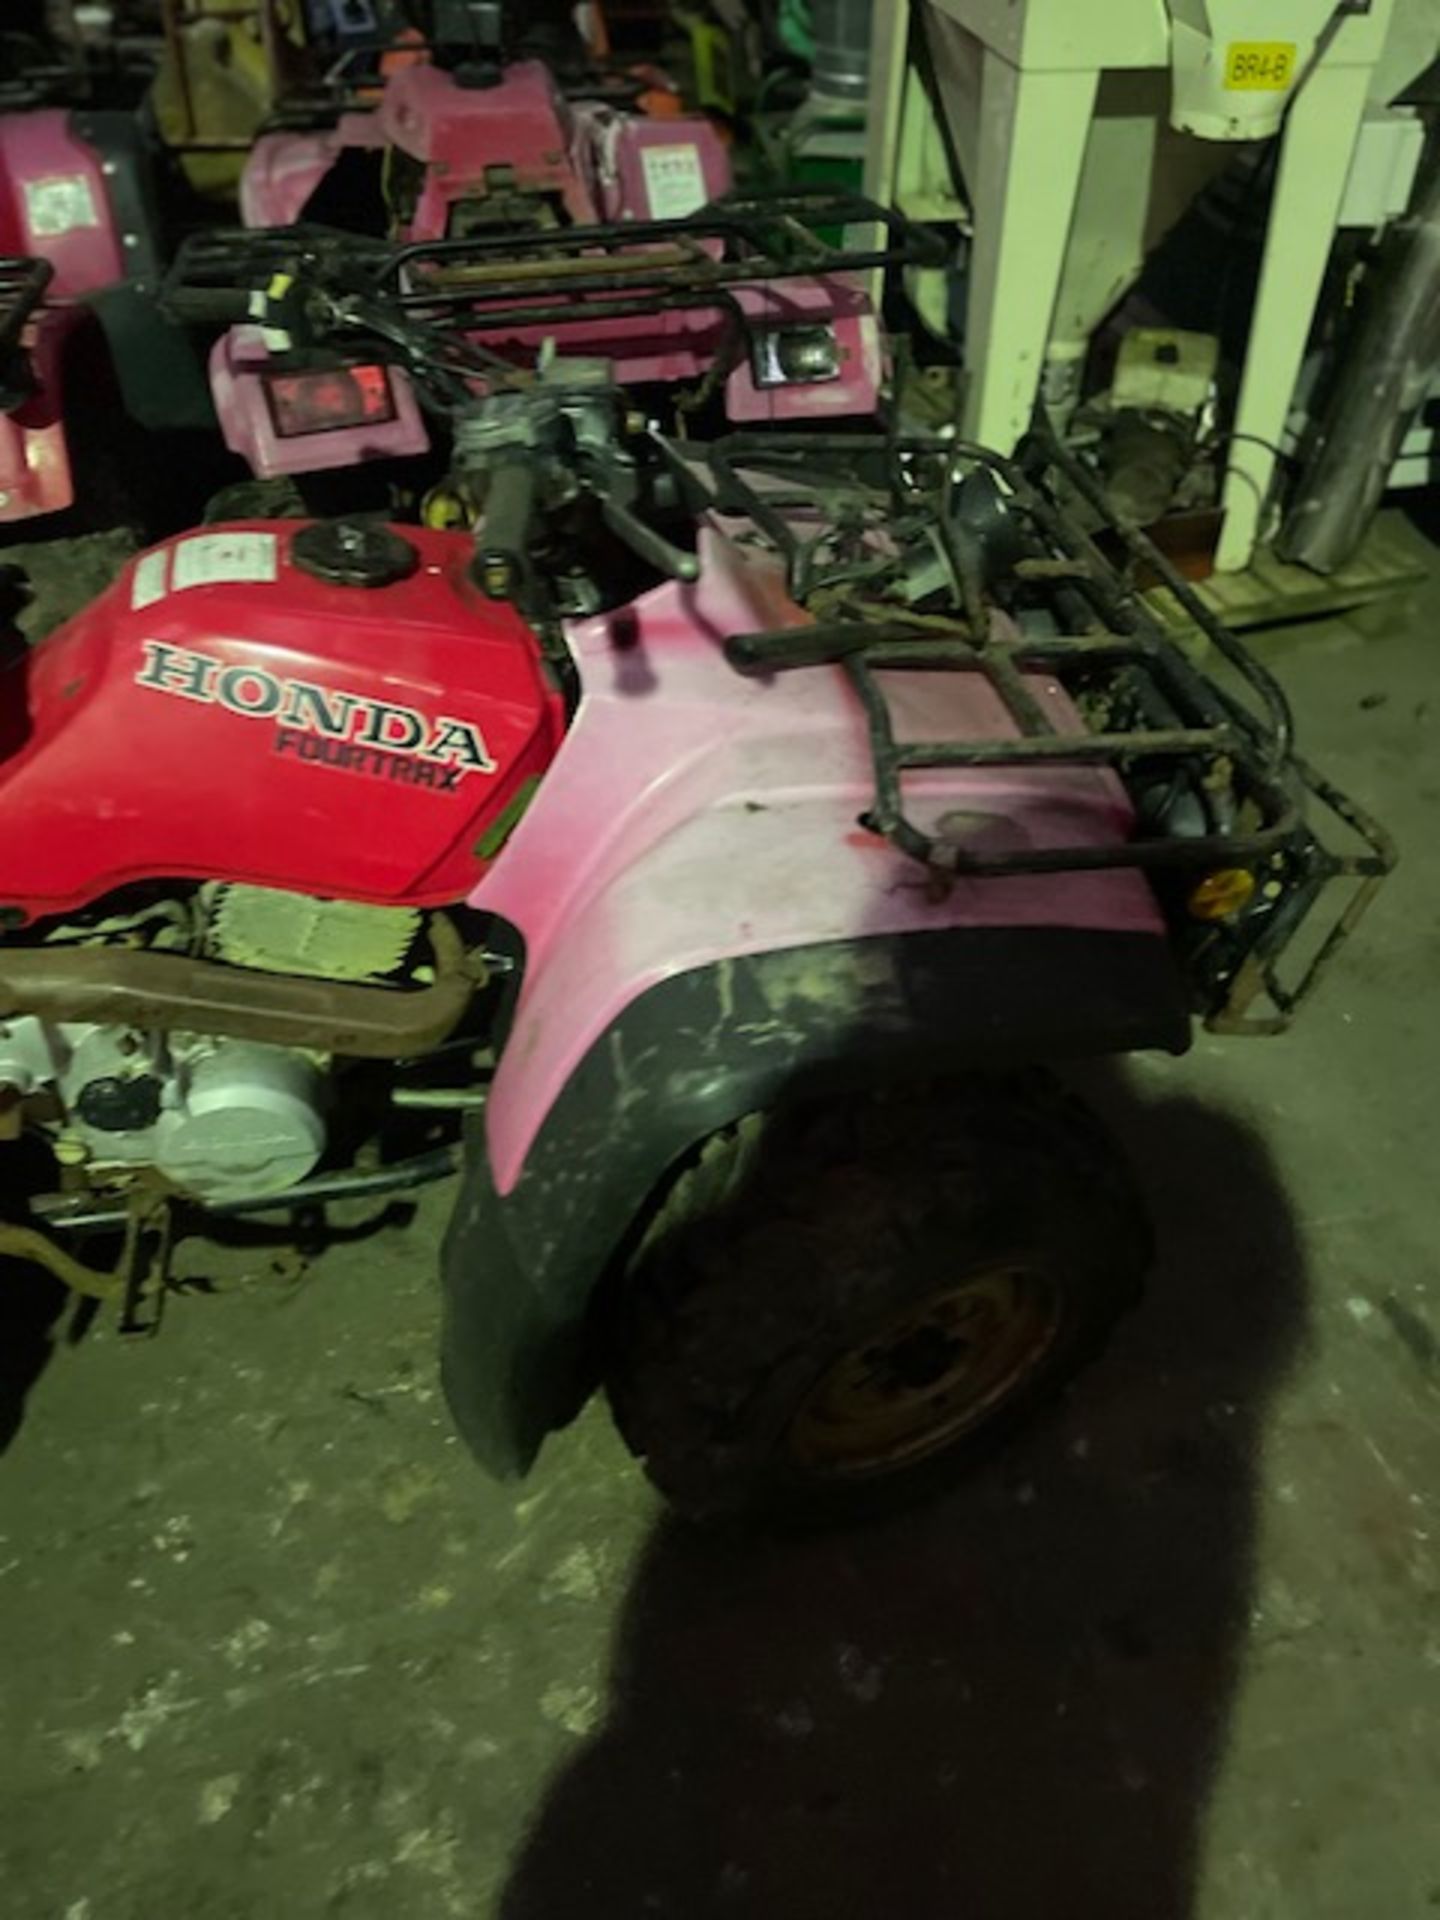 Quad bike fortrax Honda 400 non runner needs tlc - no documents but it has been registered by - Image 4 of 6